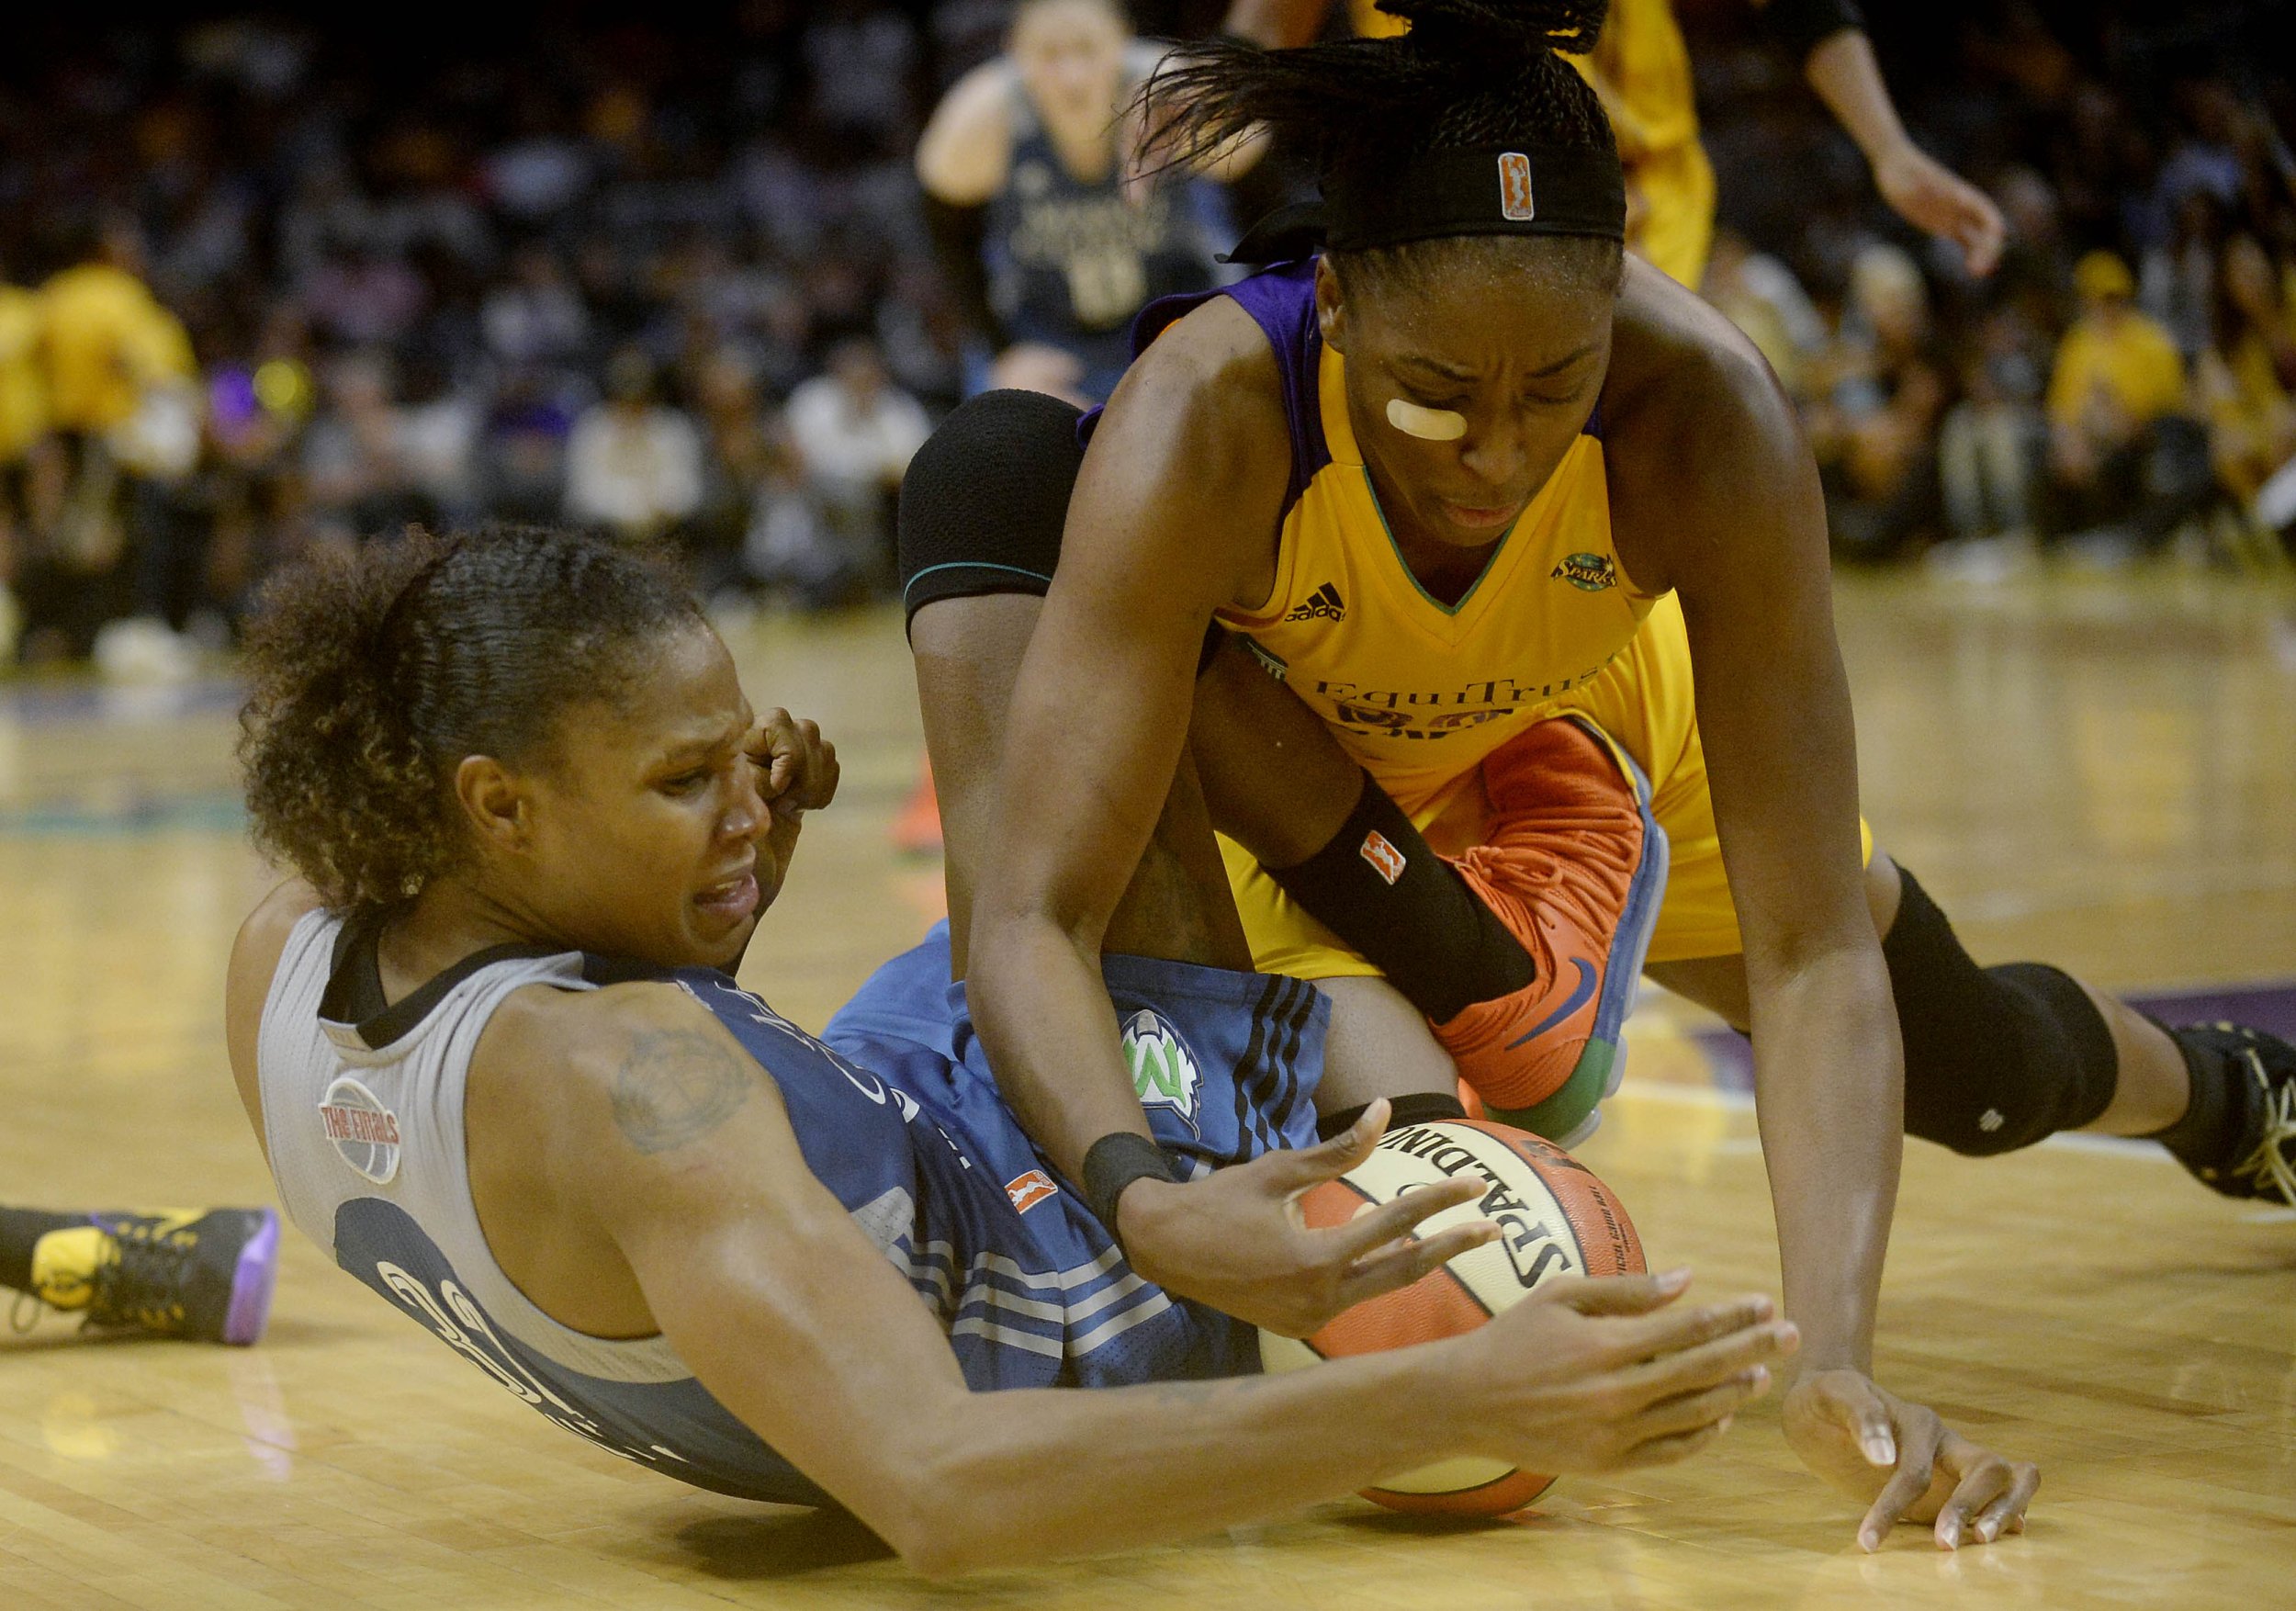 The case for boosting WNBA player salaries